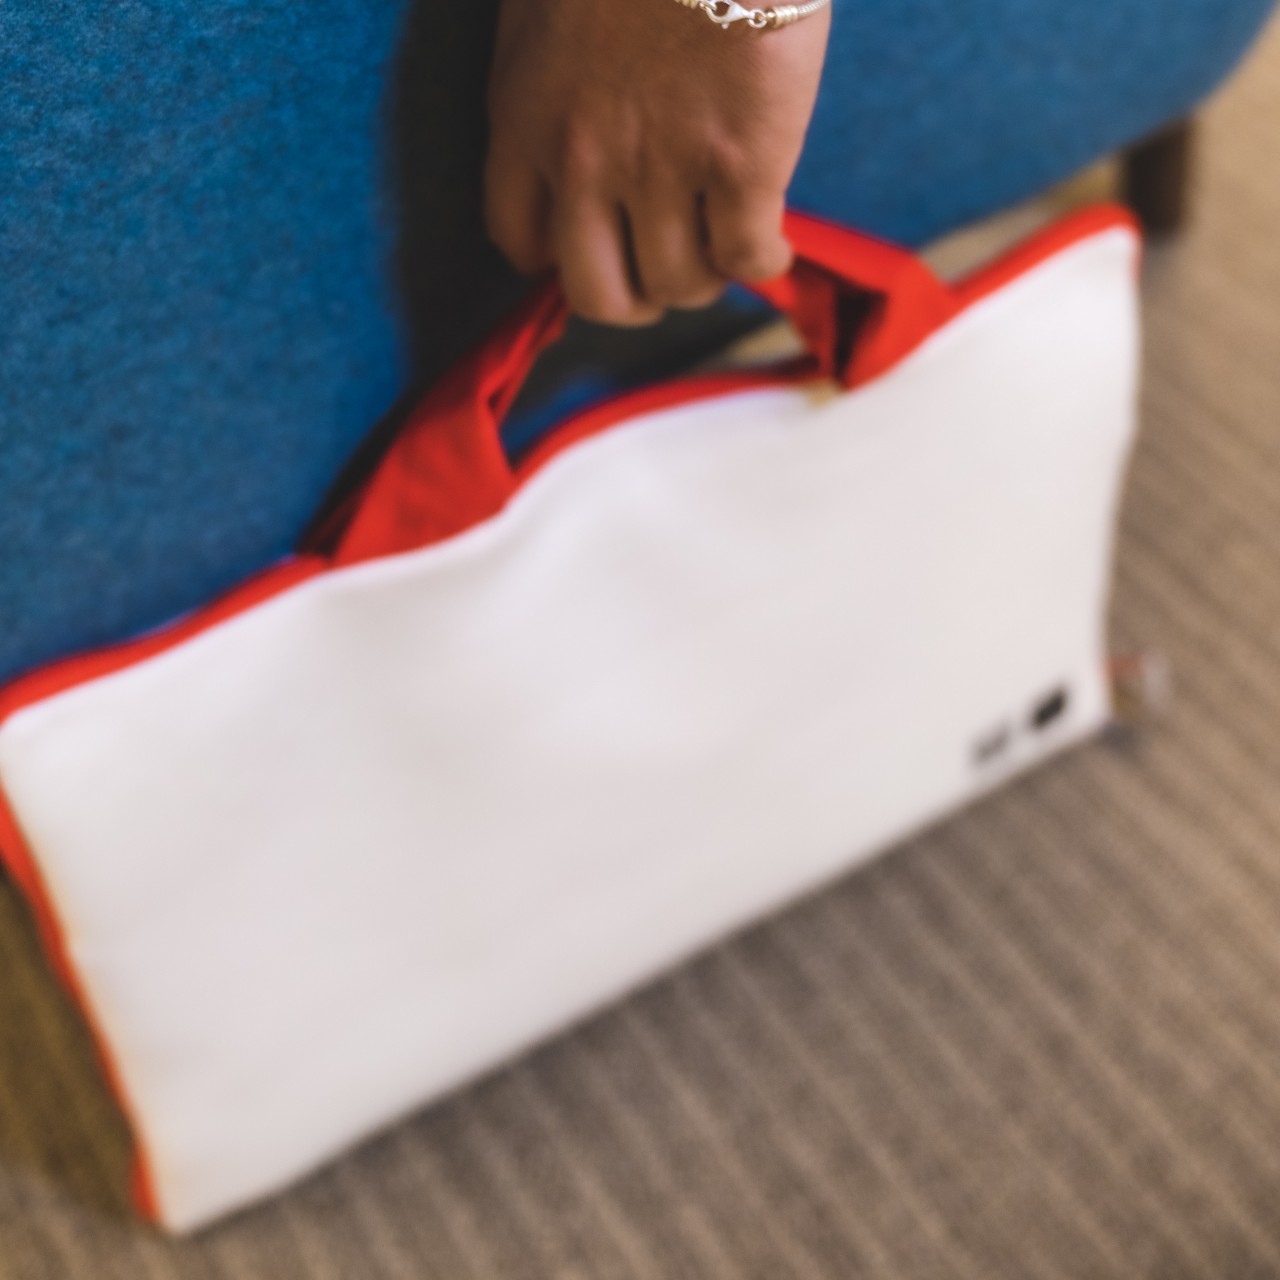 This zero-waste laptop bag tries to make up for your laptop’s environmental sins